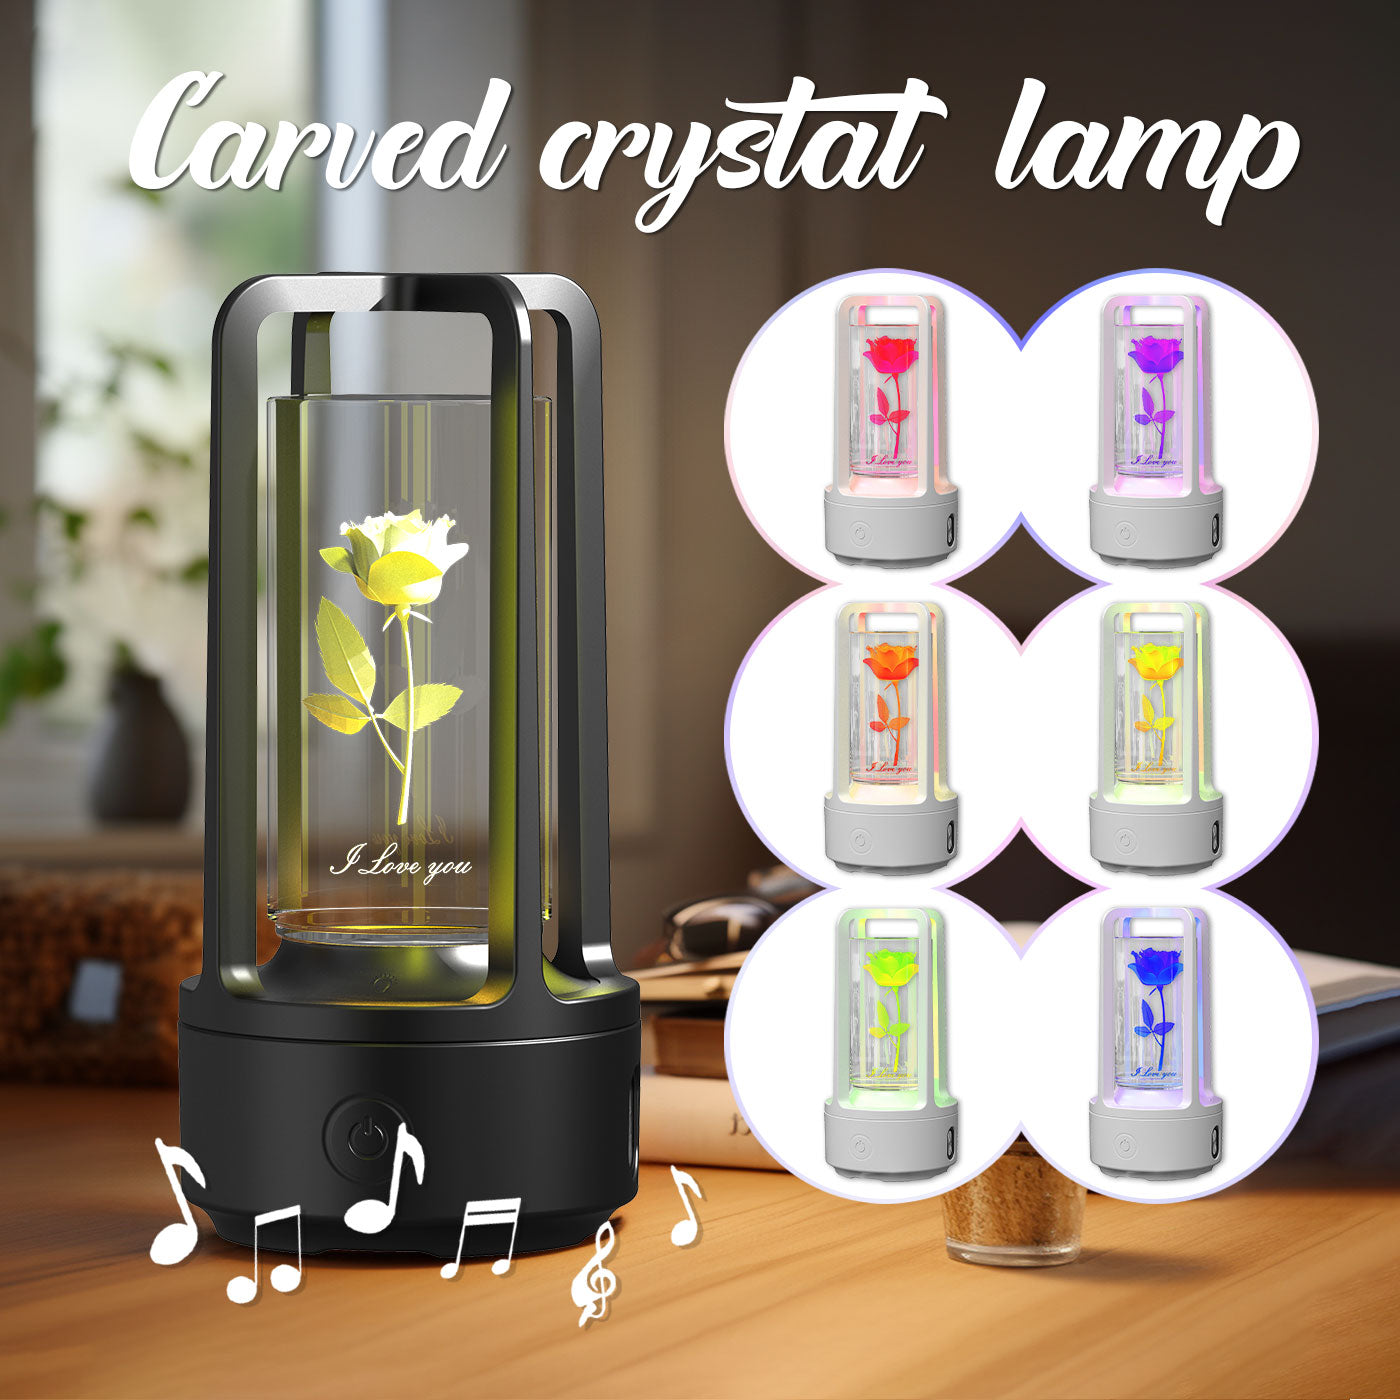 Creative 2-in-1 Audio Acrylic Crystal Lamp | Bluetooth Speaker | Touch Night Light Lamp